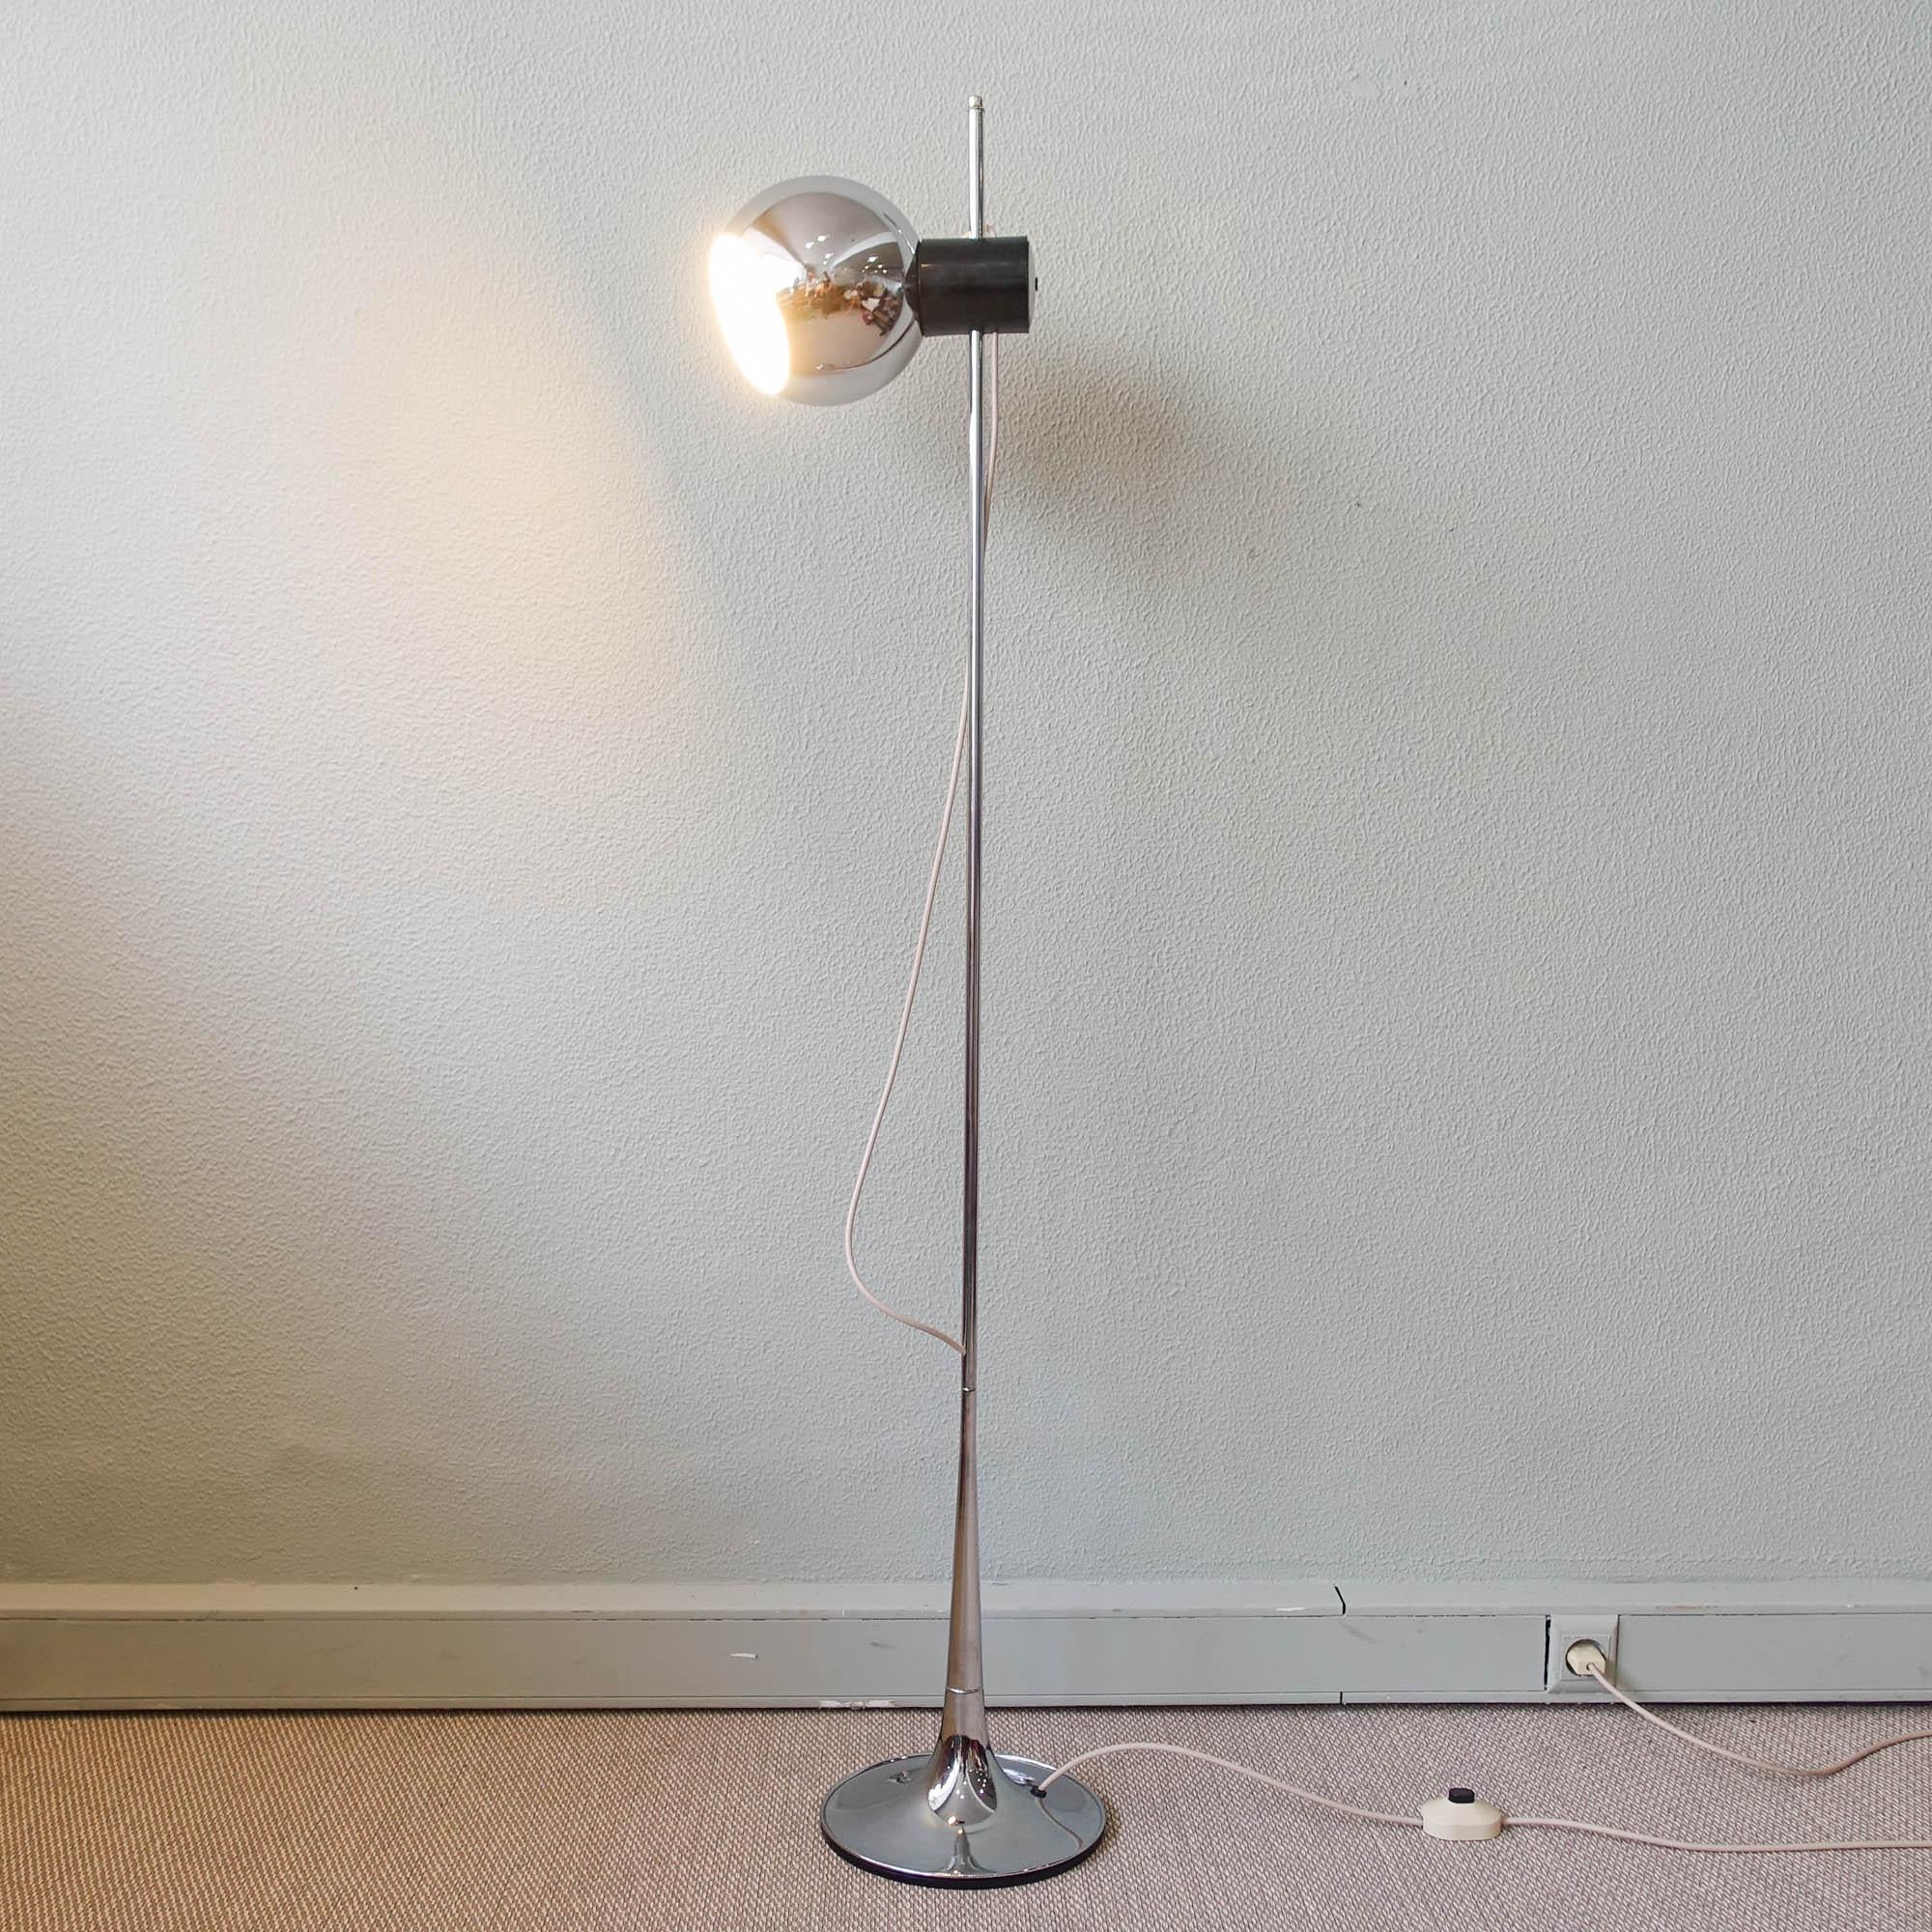 This floor lamp was designed by Goffredo Reggiani for Reggiani during the 1970's. It features a tubular center column, with one eyeball globe that rotates in all directions and on different axes for more precise lighting control, allowing for